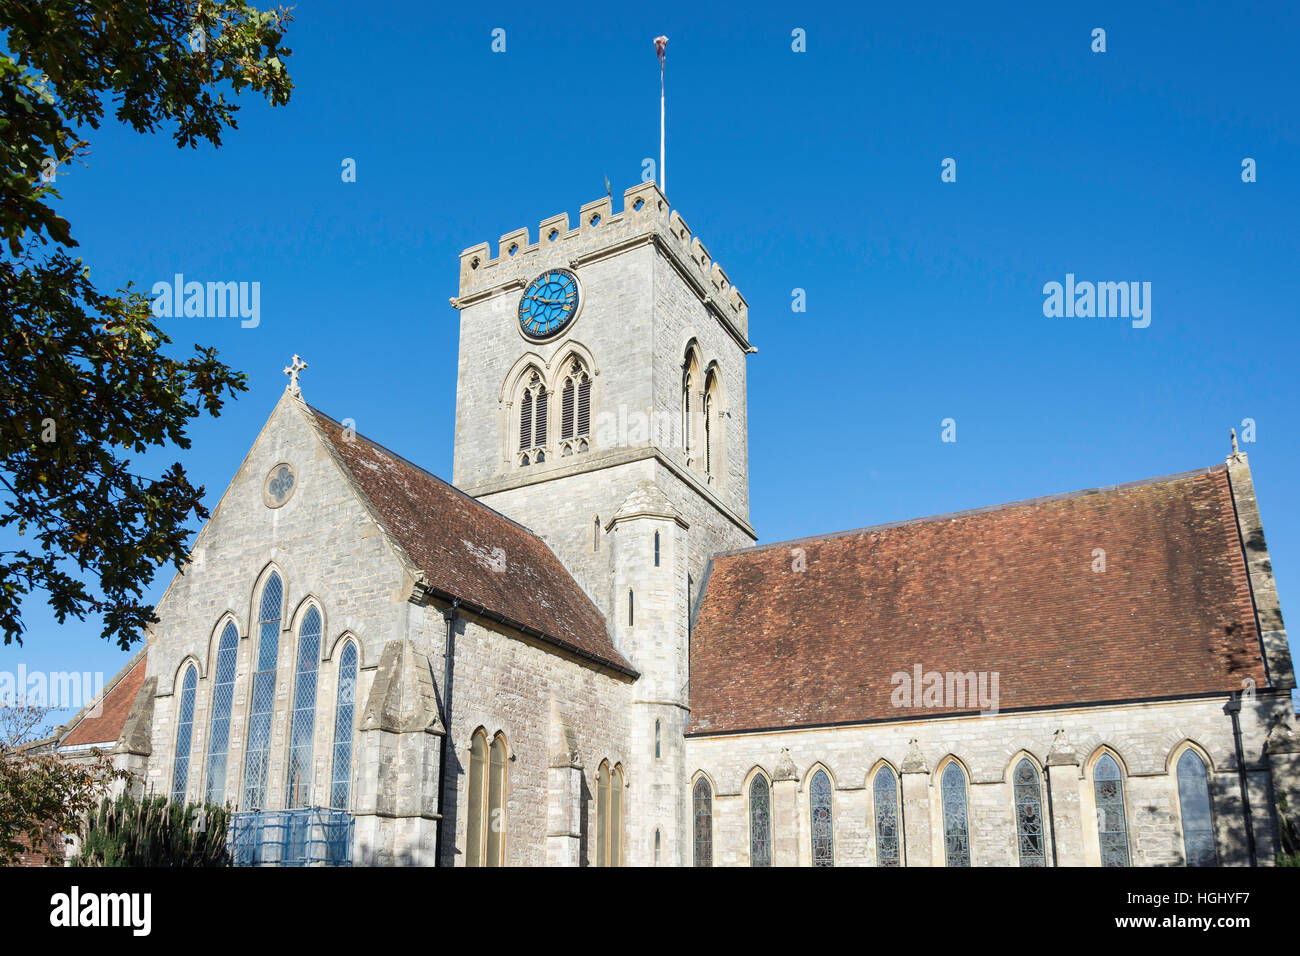 Church of St Peter and St Paul, Market Place, Ringwood, Hampshire, England, United Kingdom Stock Photo